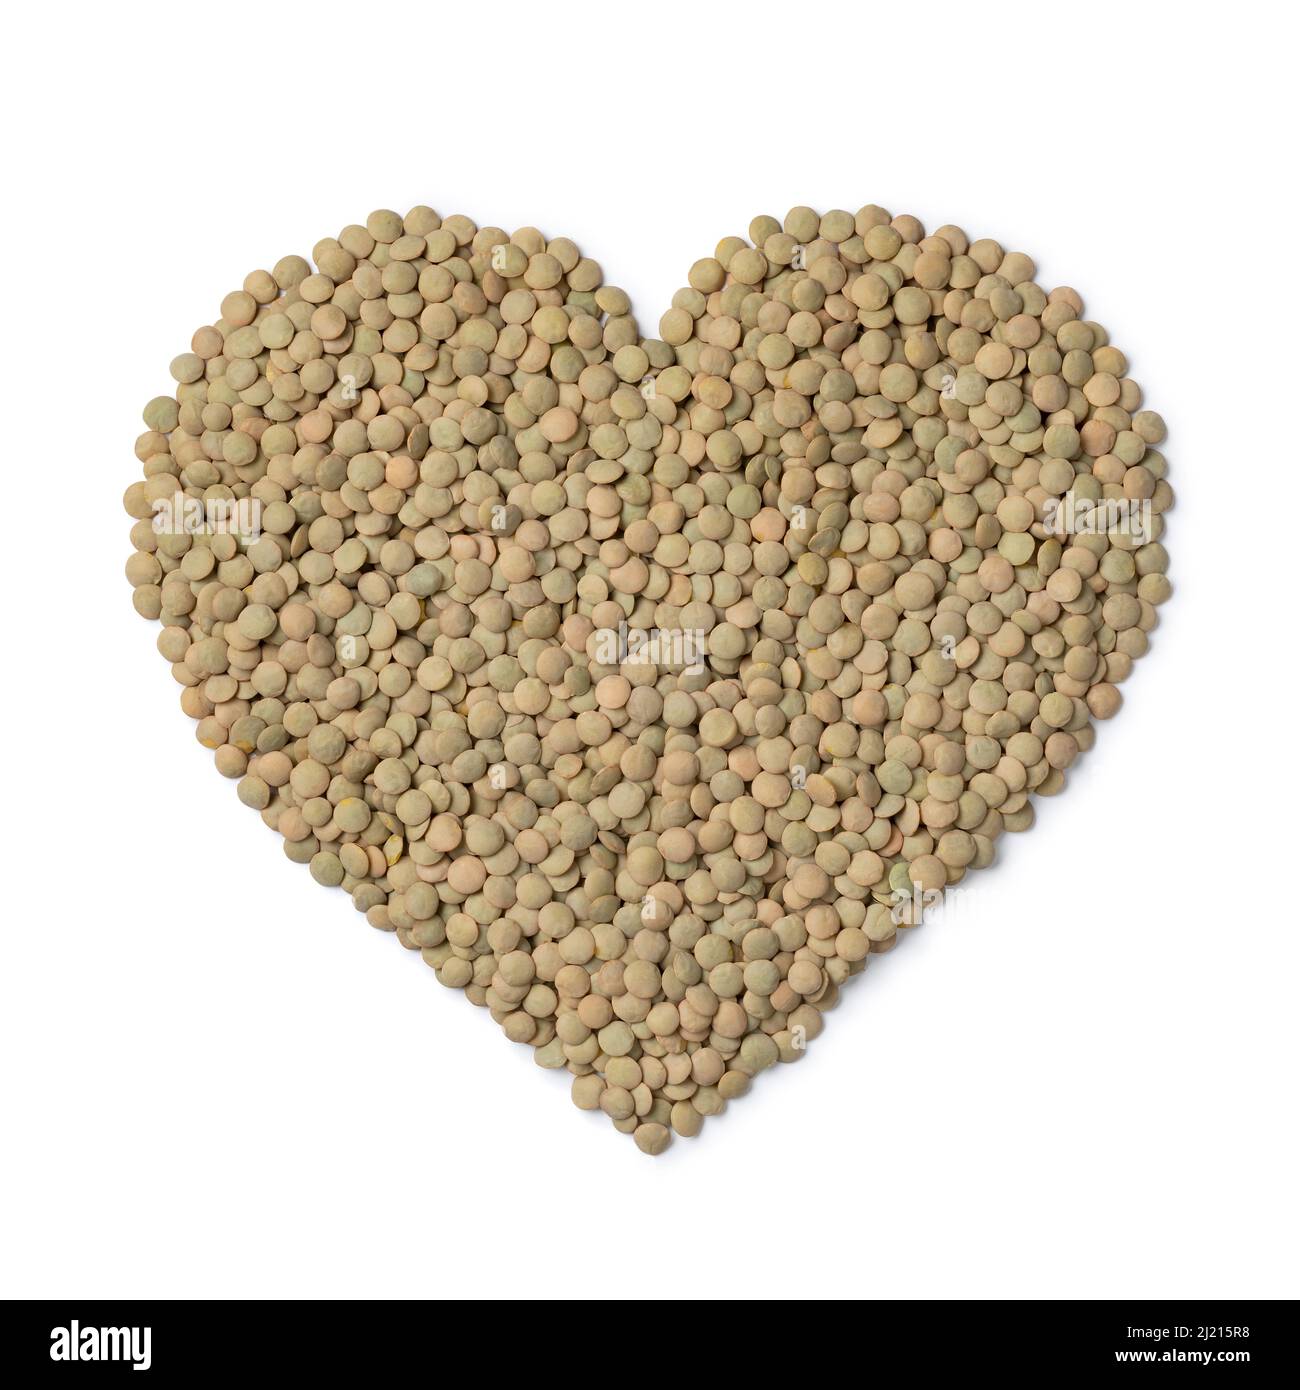 Raw green lentils in heart shape isolated on white background Stock Photo